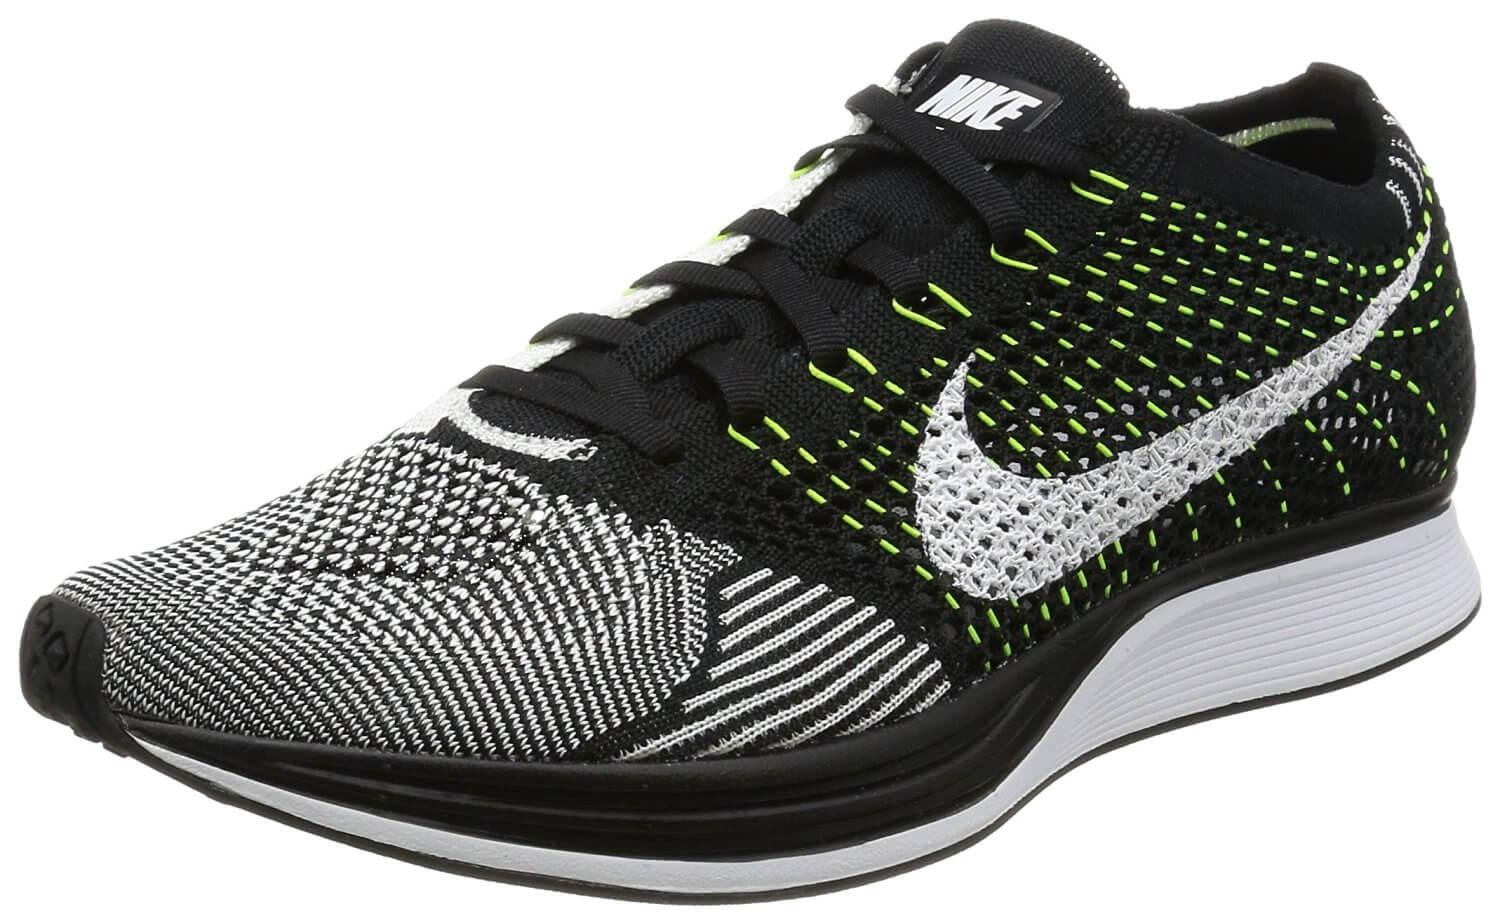 Nike Flyknit Racer Reviewed, and Compared in 2022 | RunnerClick